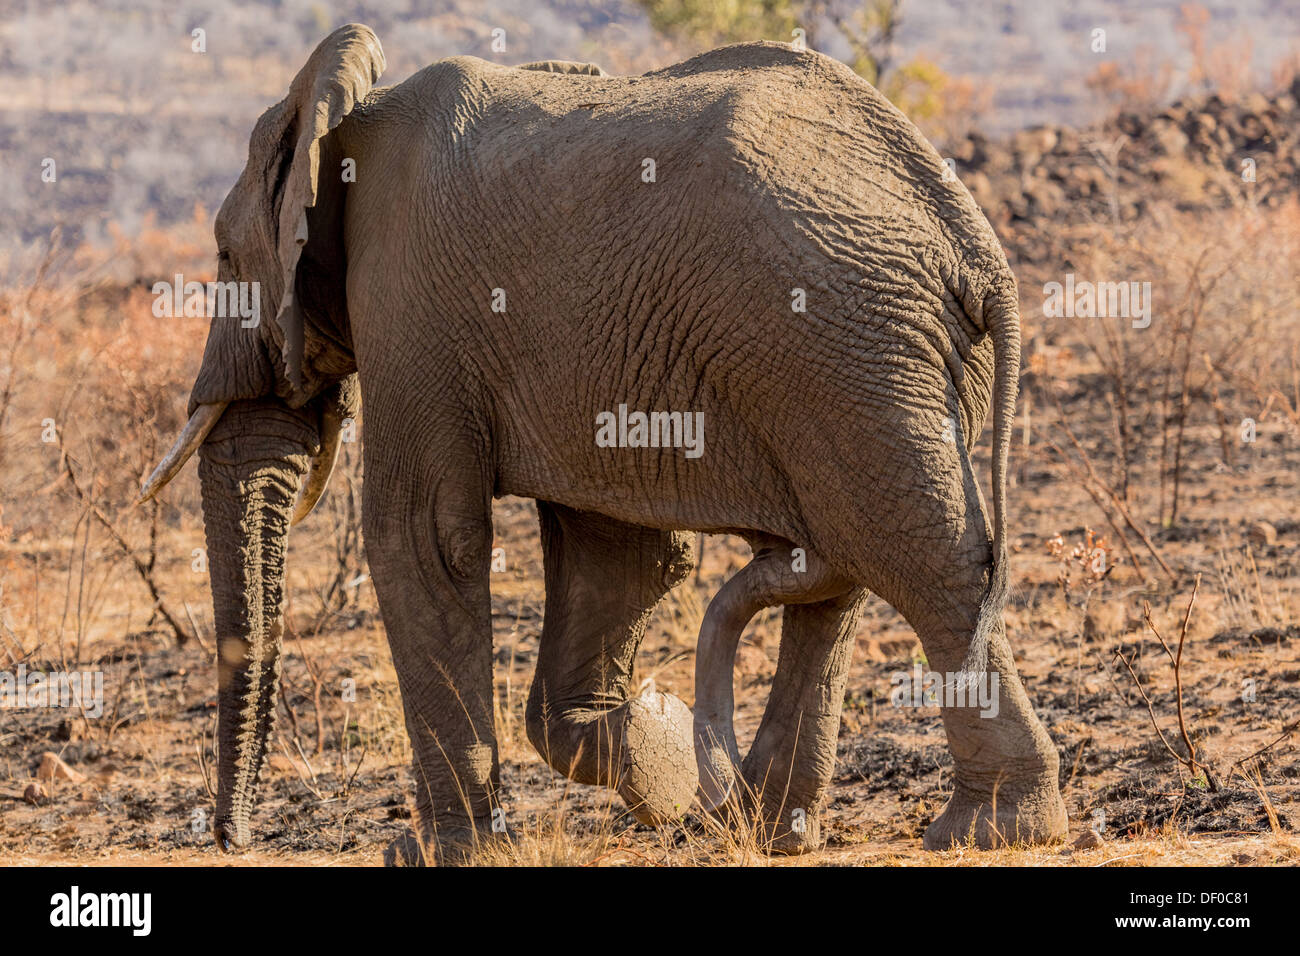 A giant male elephant walking in the grass lands of South Africa's Pilanesberg National Park Stock Photo